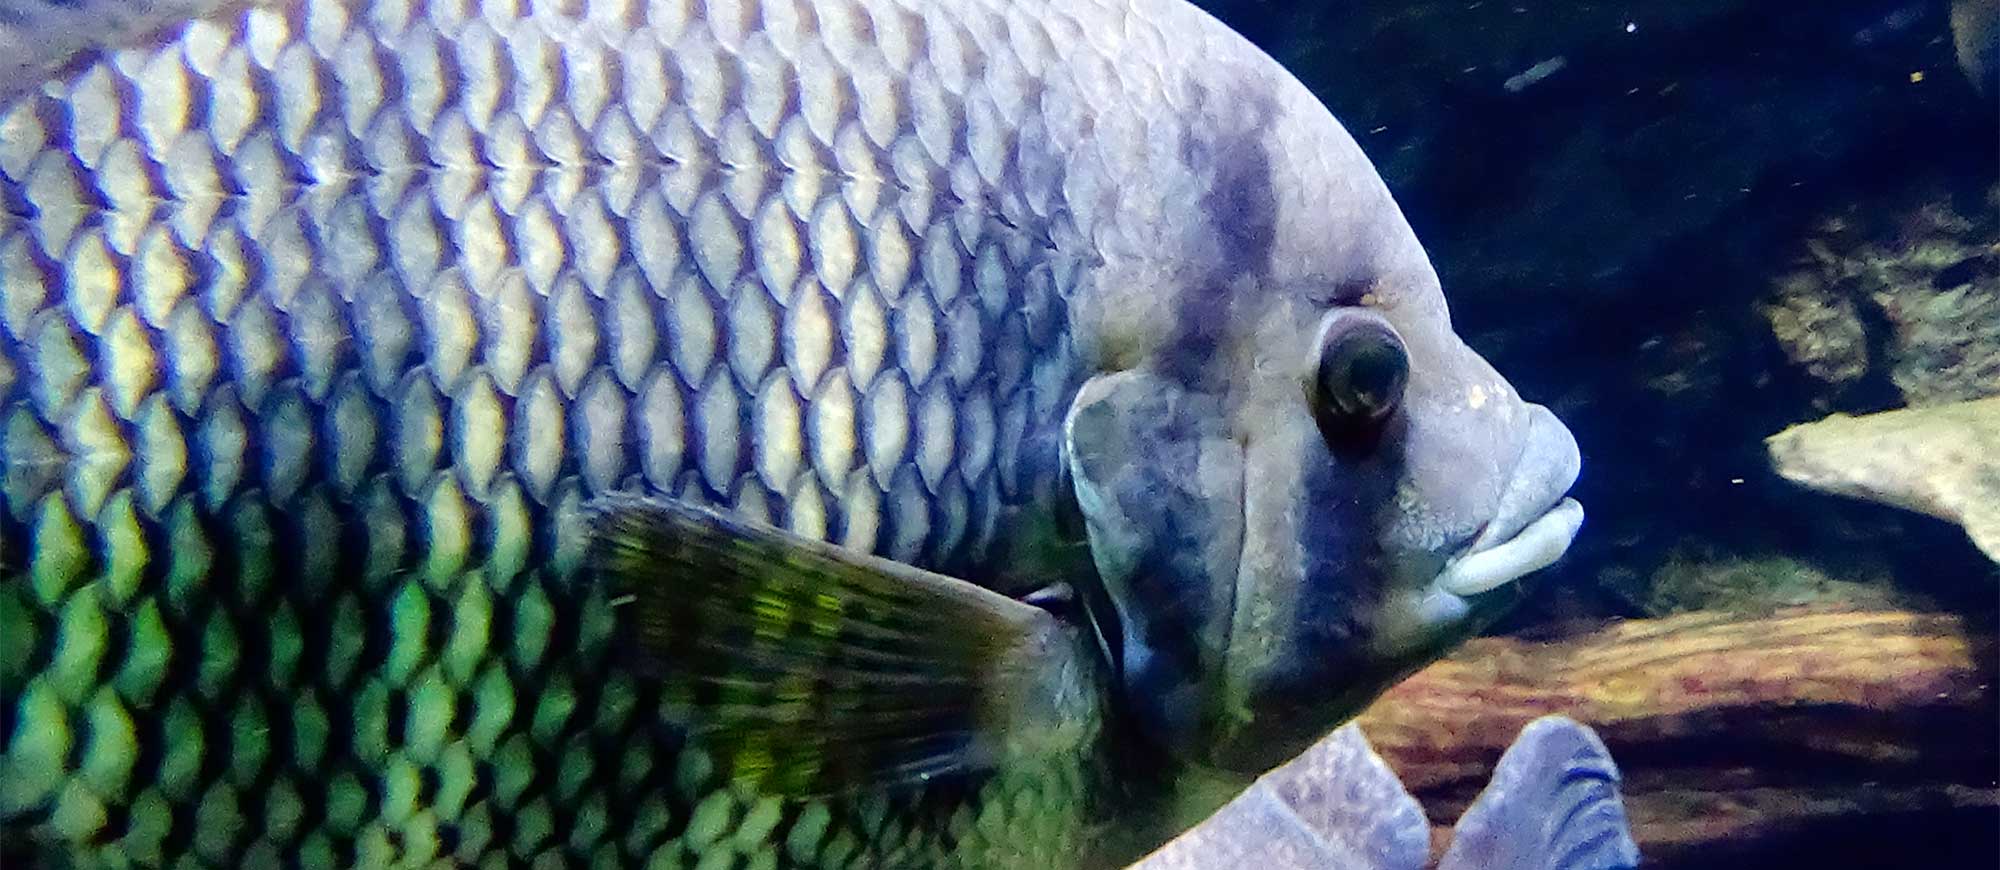 A tilapia fish under water, photo.